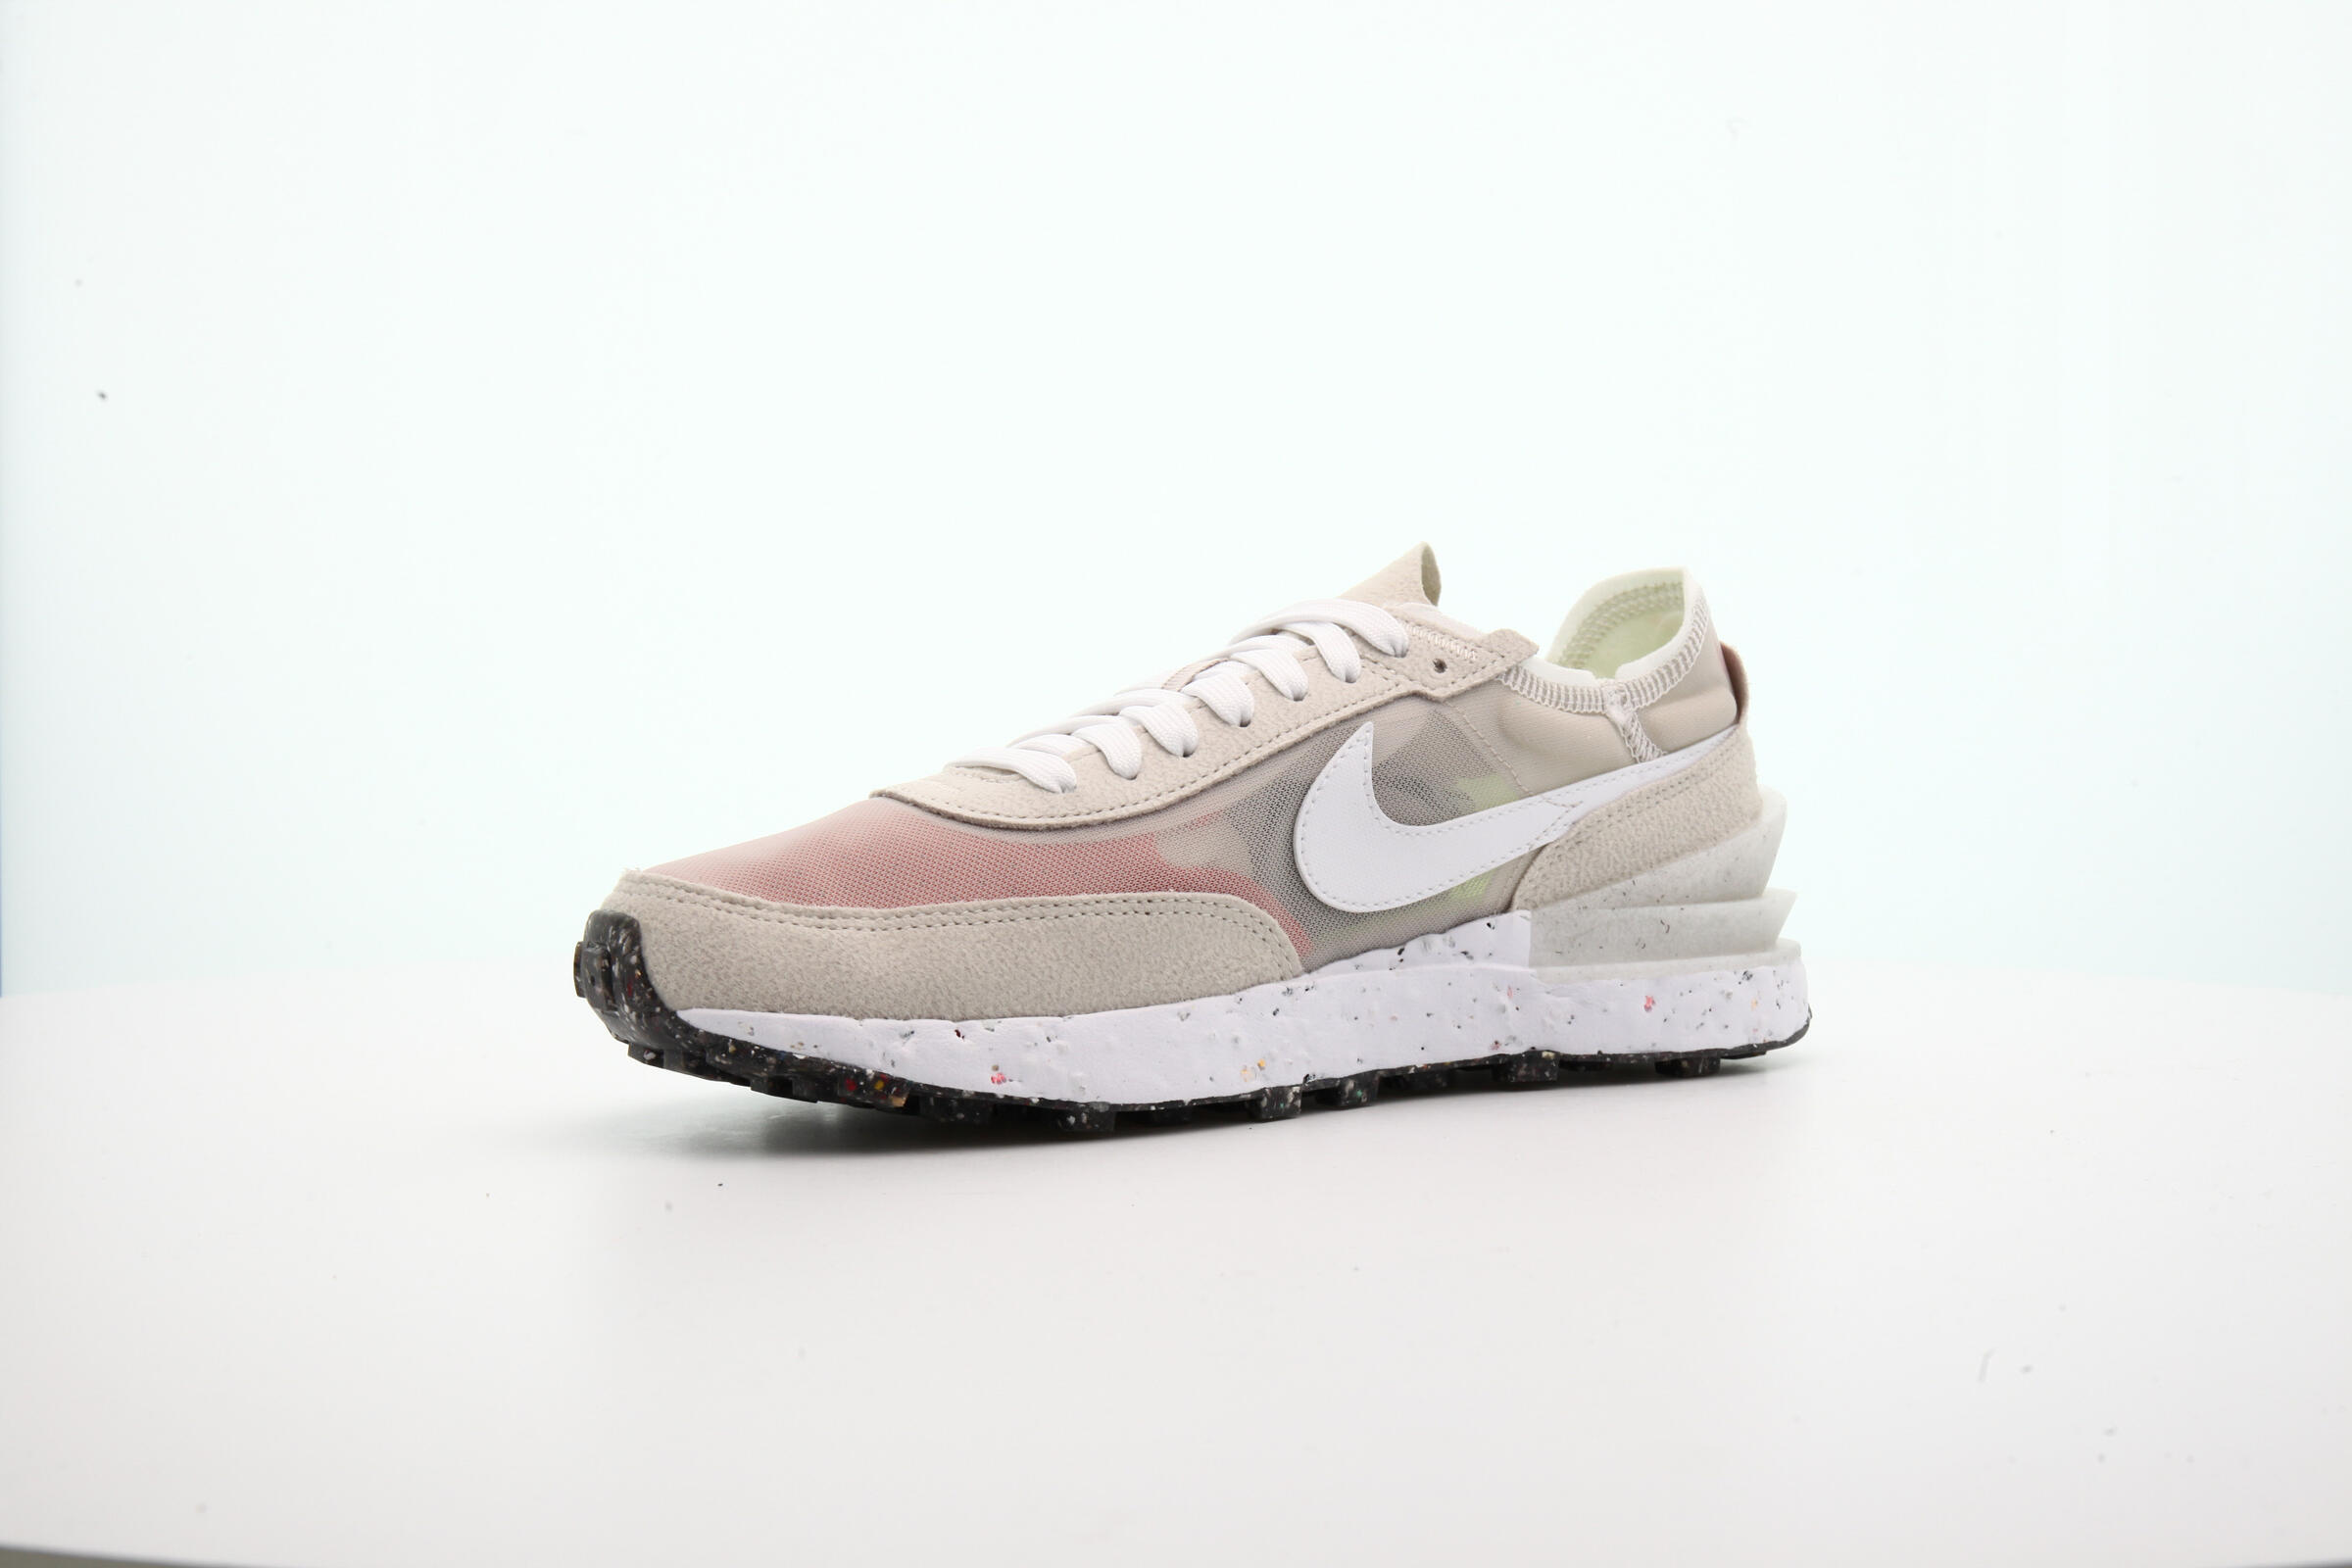 Nike WAFFLE ONE CRATER